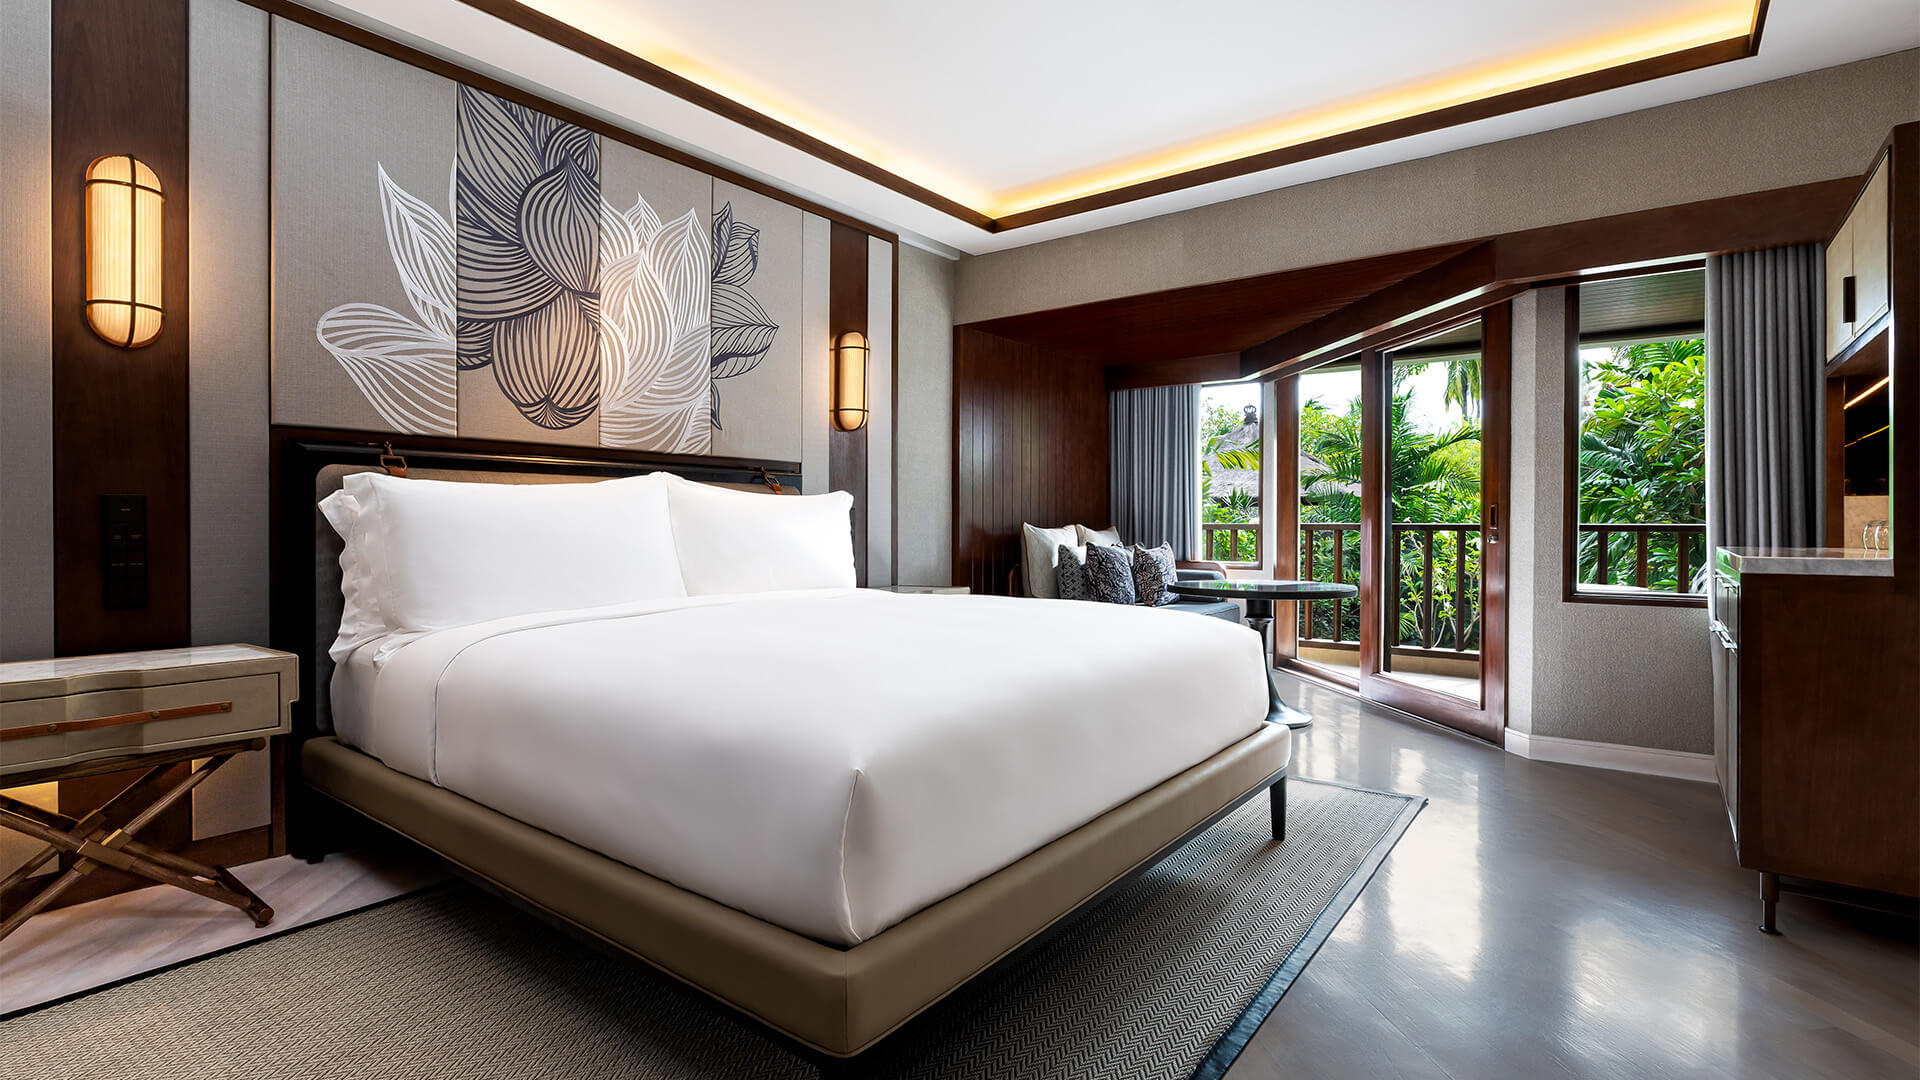 A Luxury Deluxe room with a large bed and balcony area